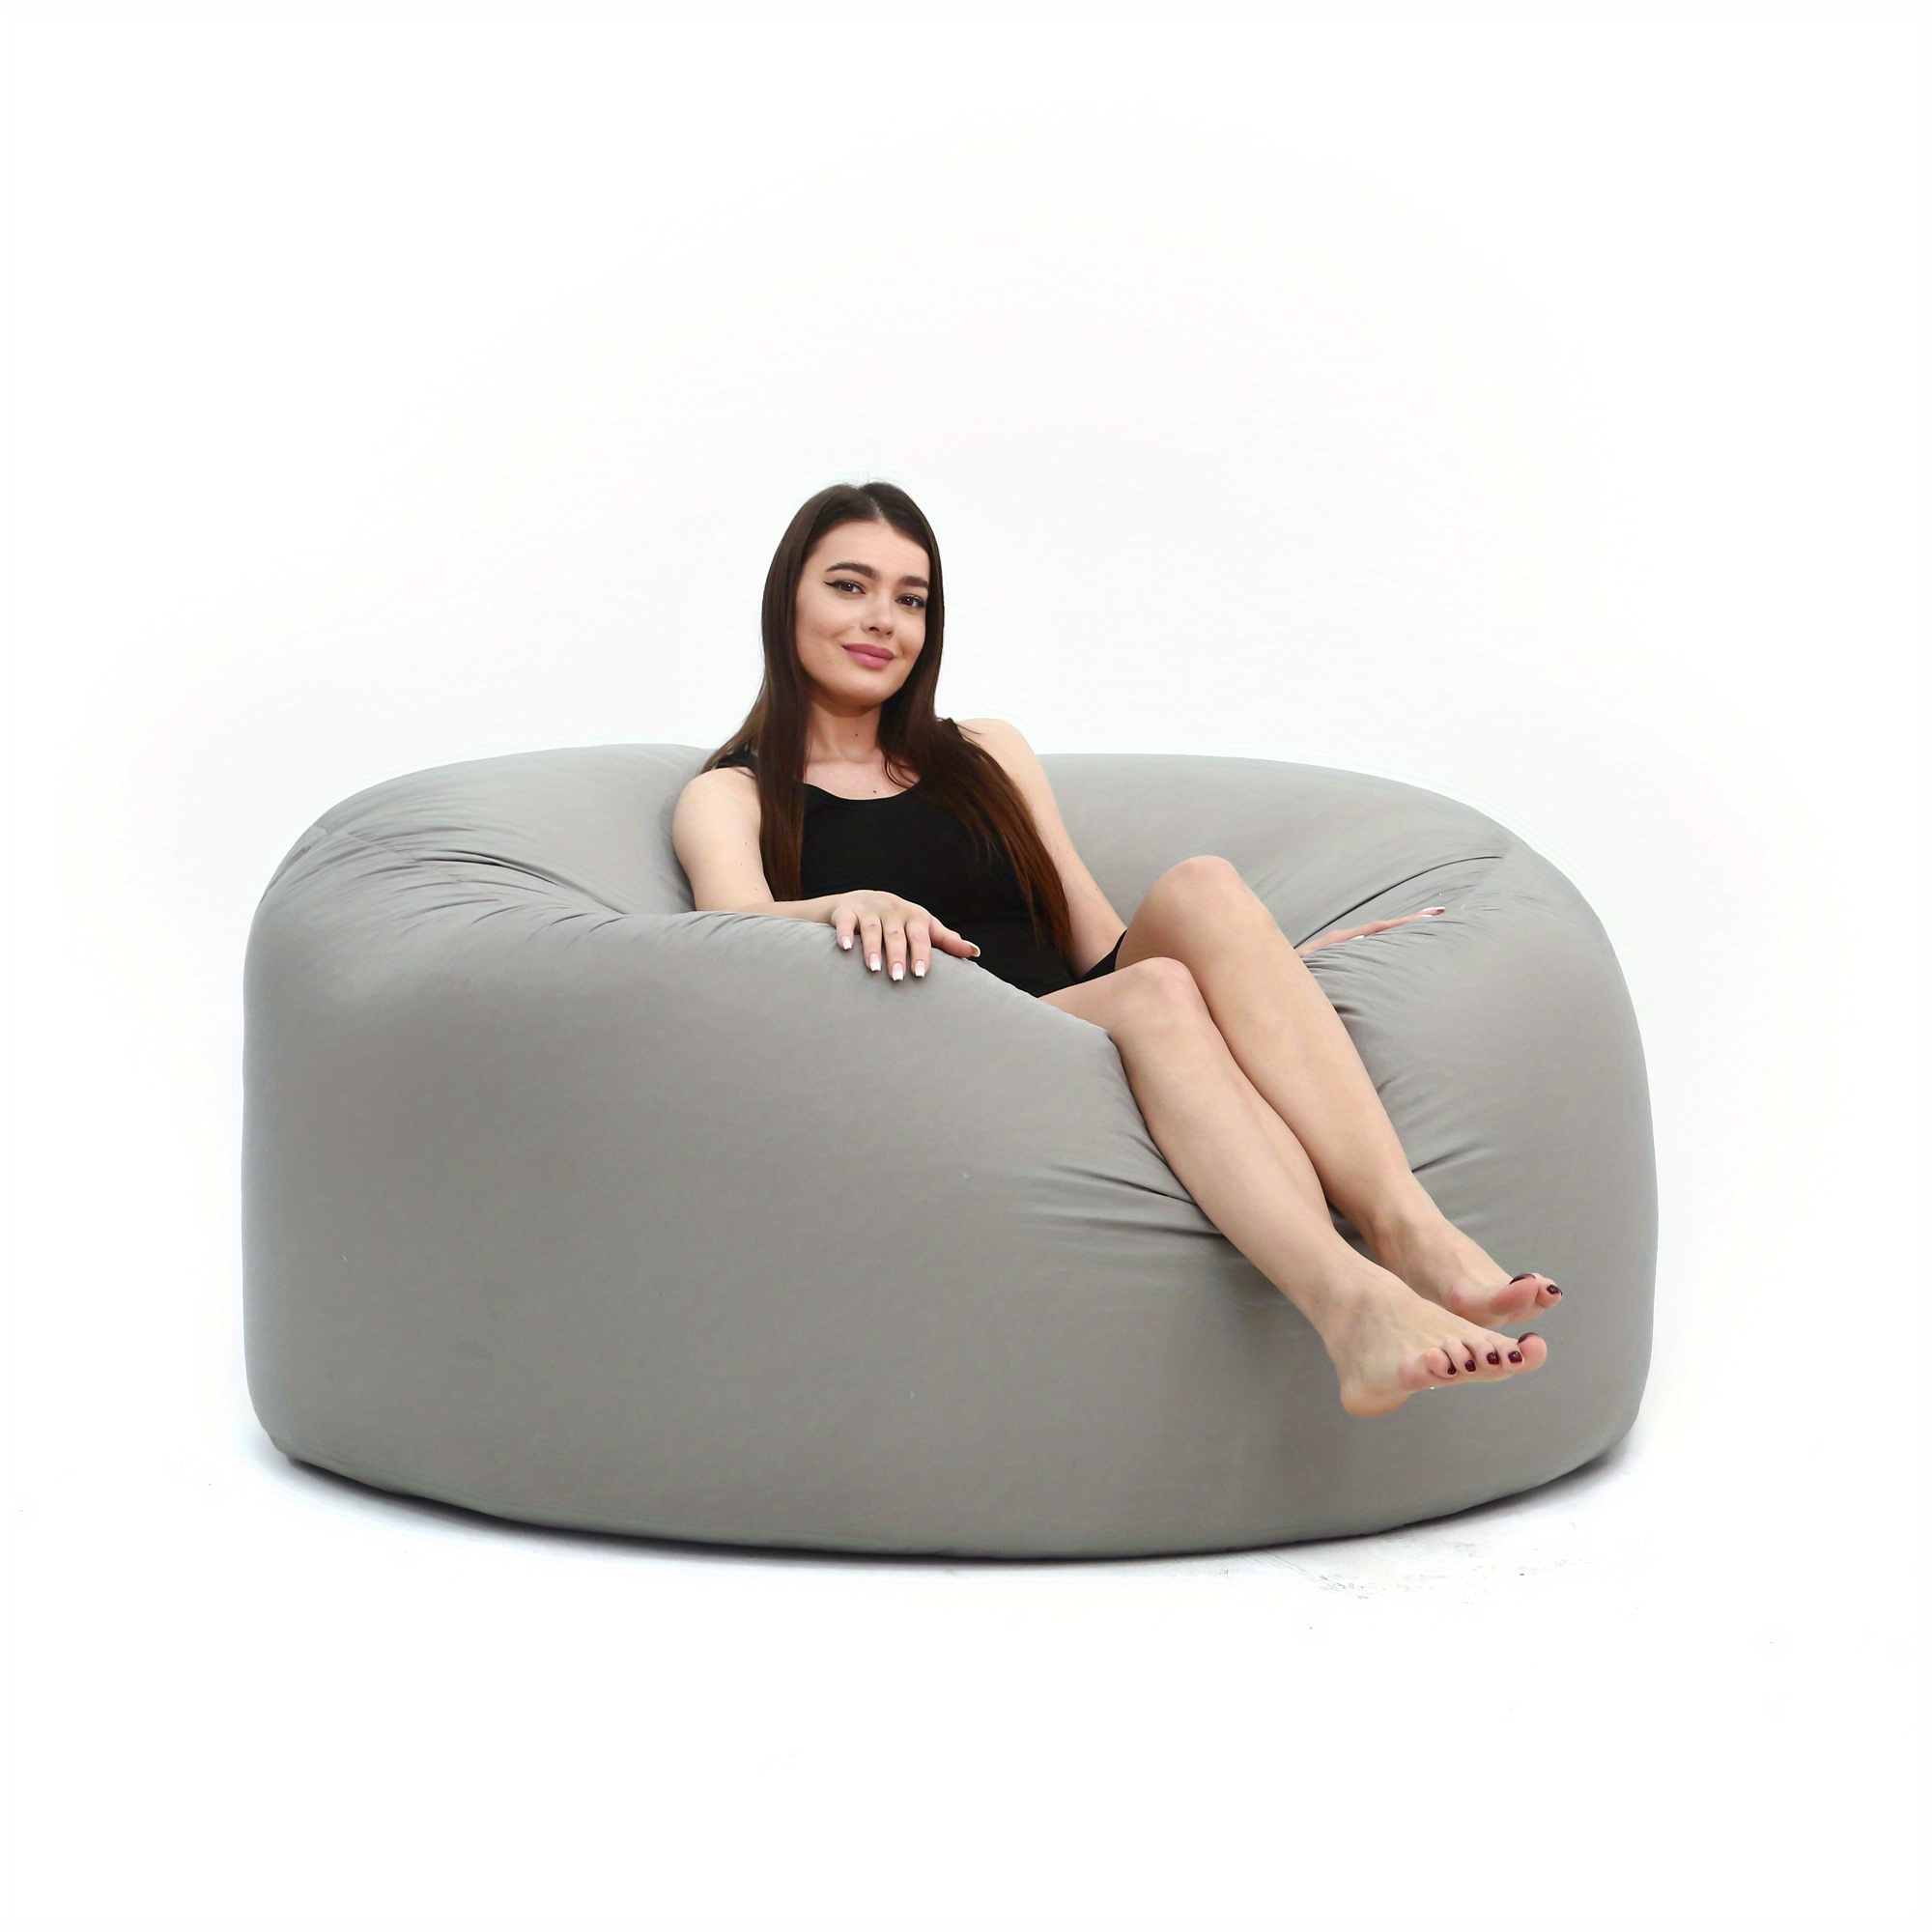 Big Luxury Sofa Pouf Cover Bean Bag Chair Bean Bag Cover Waterproof Round  Pouf Liner Cover Bean Bag Sofa Bed Couch Inner Covers Beanbag No Filling